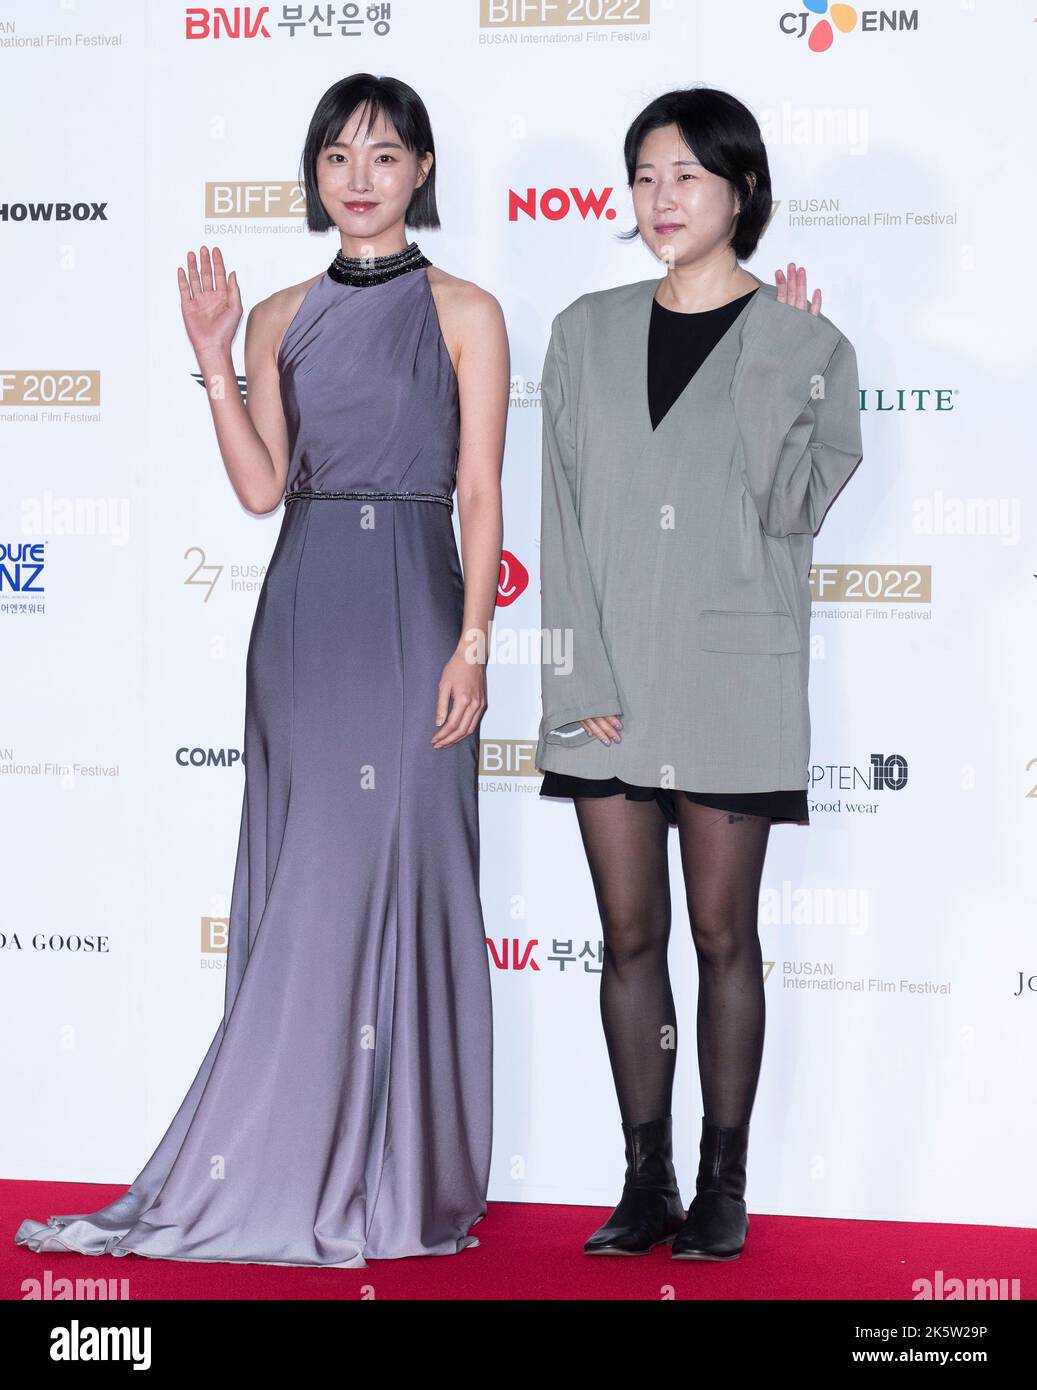 Busan, South Korea. 5th Oct, 2022. South Korean actress Han Hae-in, film director Yoo Ji-young, arrives red carpet at the opening ceremony during the 27th Busan International Film Festival at Busan Cinema Center in Busan, South Korea on October 5, 2022. (Photo by: Lee Young-ho/Sipa USA) Credit: Sipa USA/Alamy Live News Stock Photo